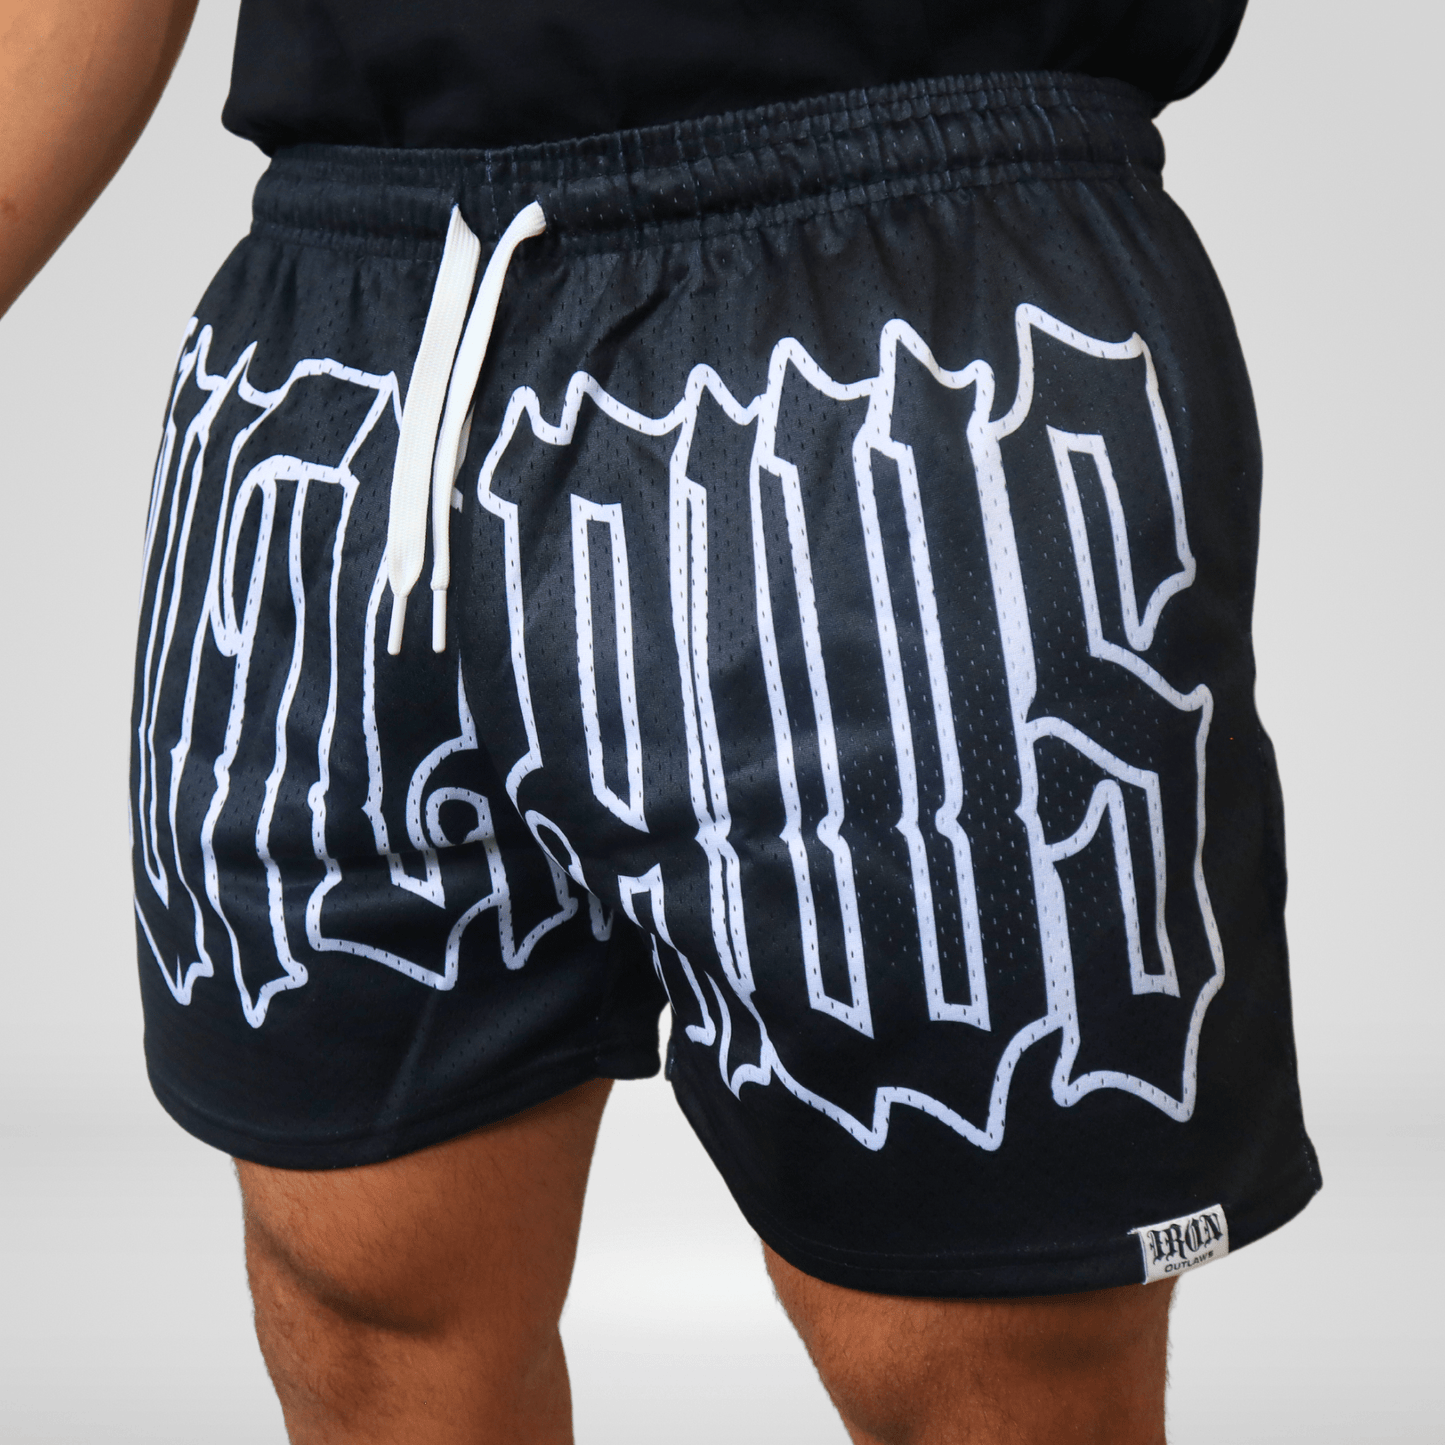 Iron Outlaws Shorts Heavyweight Outlaw Shorts